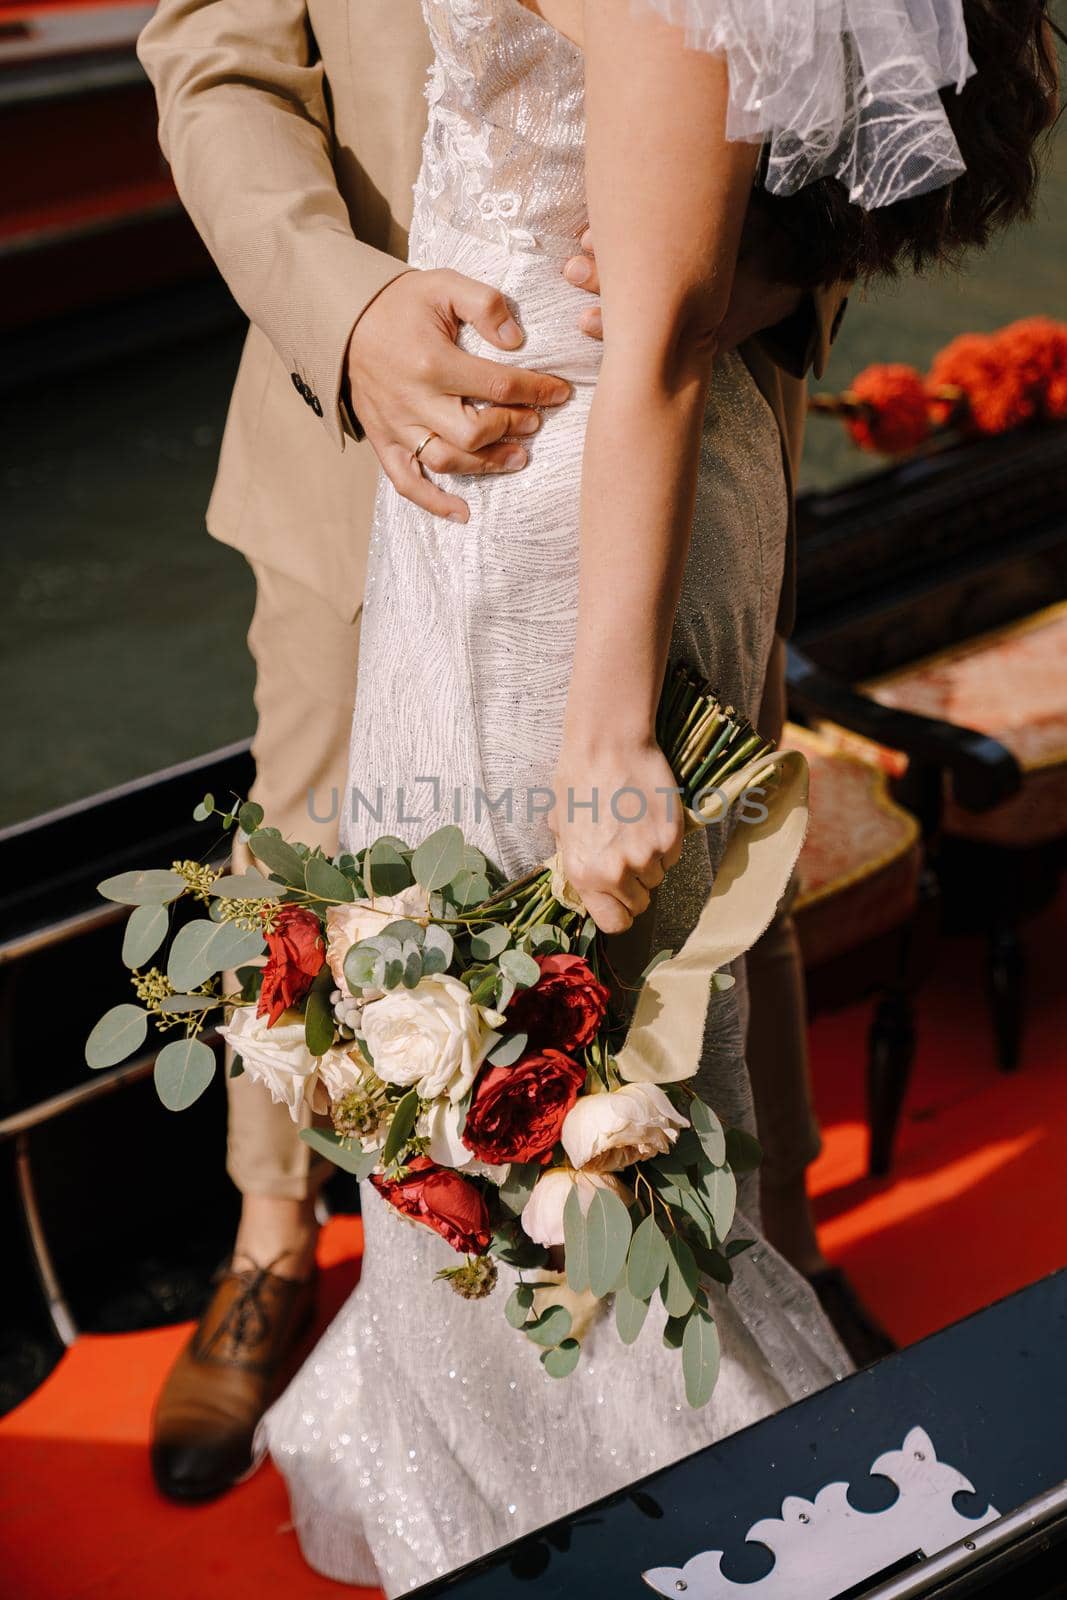 Italy wedding in Venice. Close-up - the groom hugs the bride by the waist in a classic wooden gondola. The bride holds a magnificent bouquet of white and red roses in her hand. by Nadtochiy